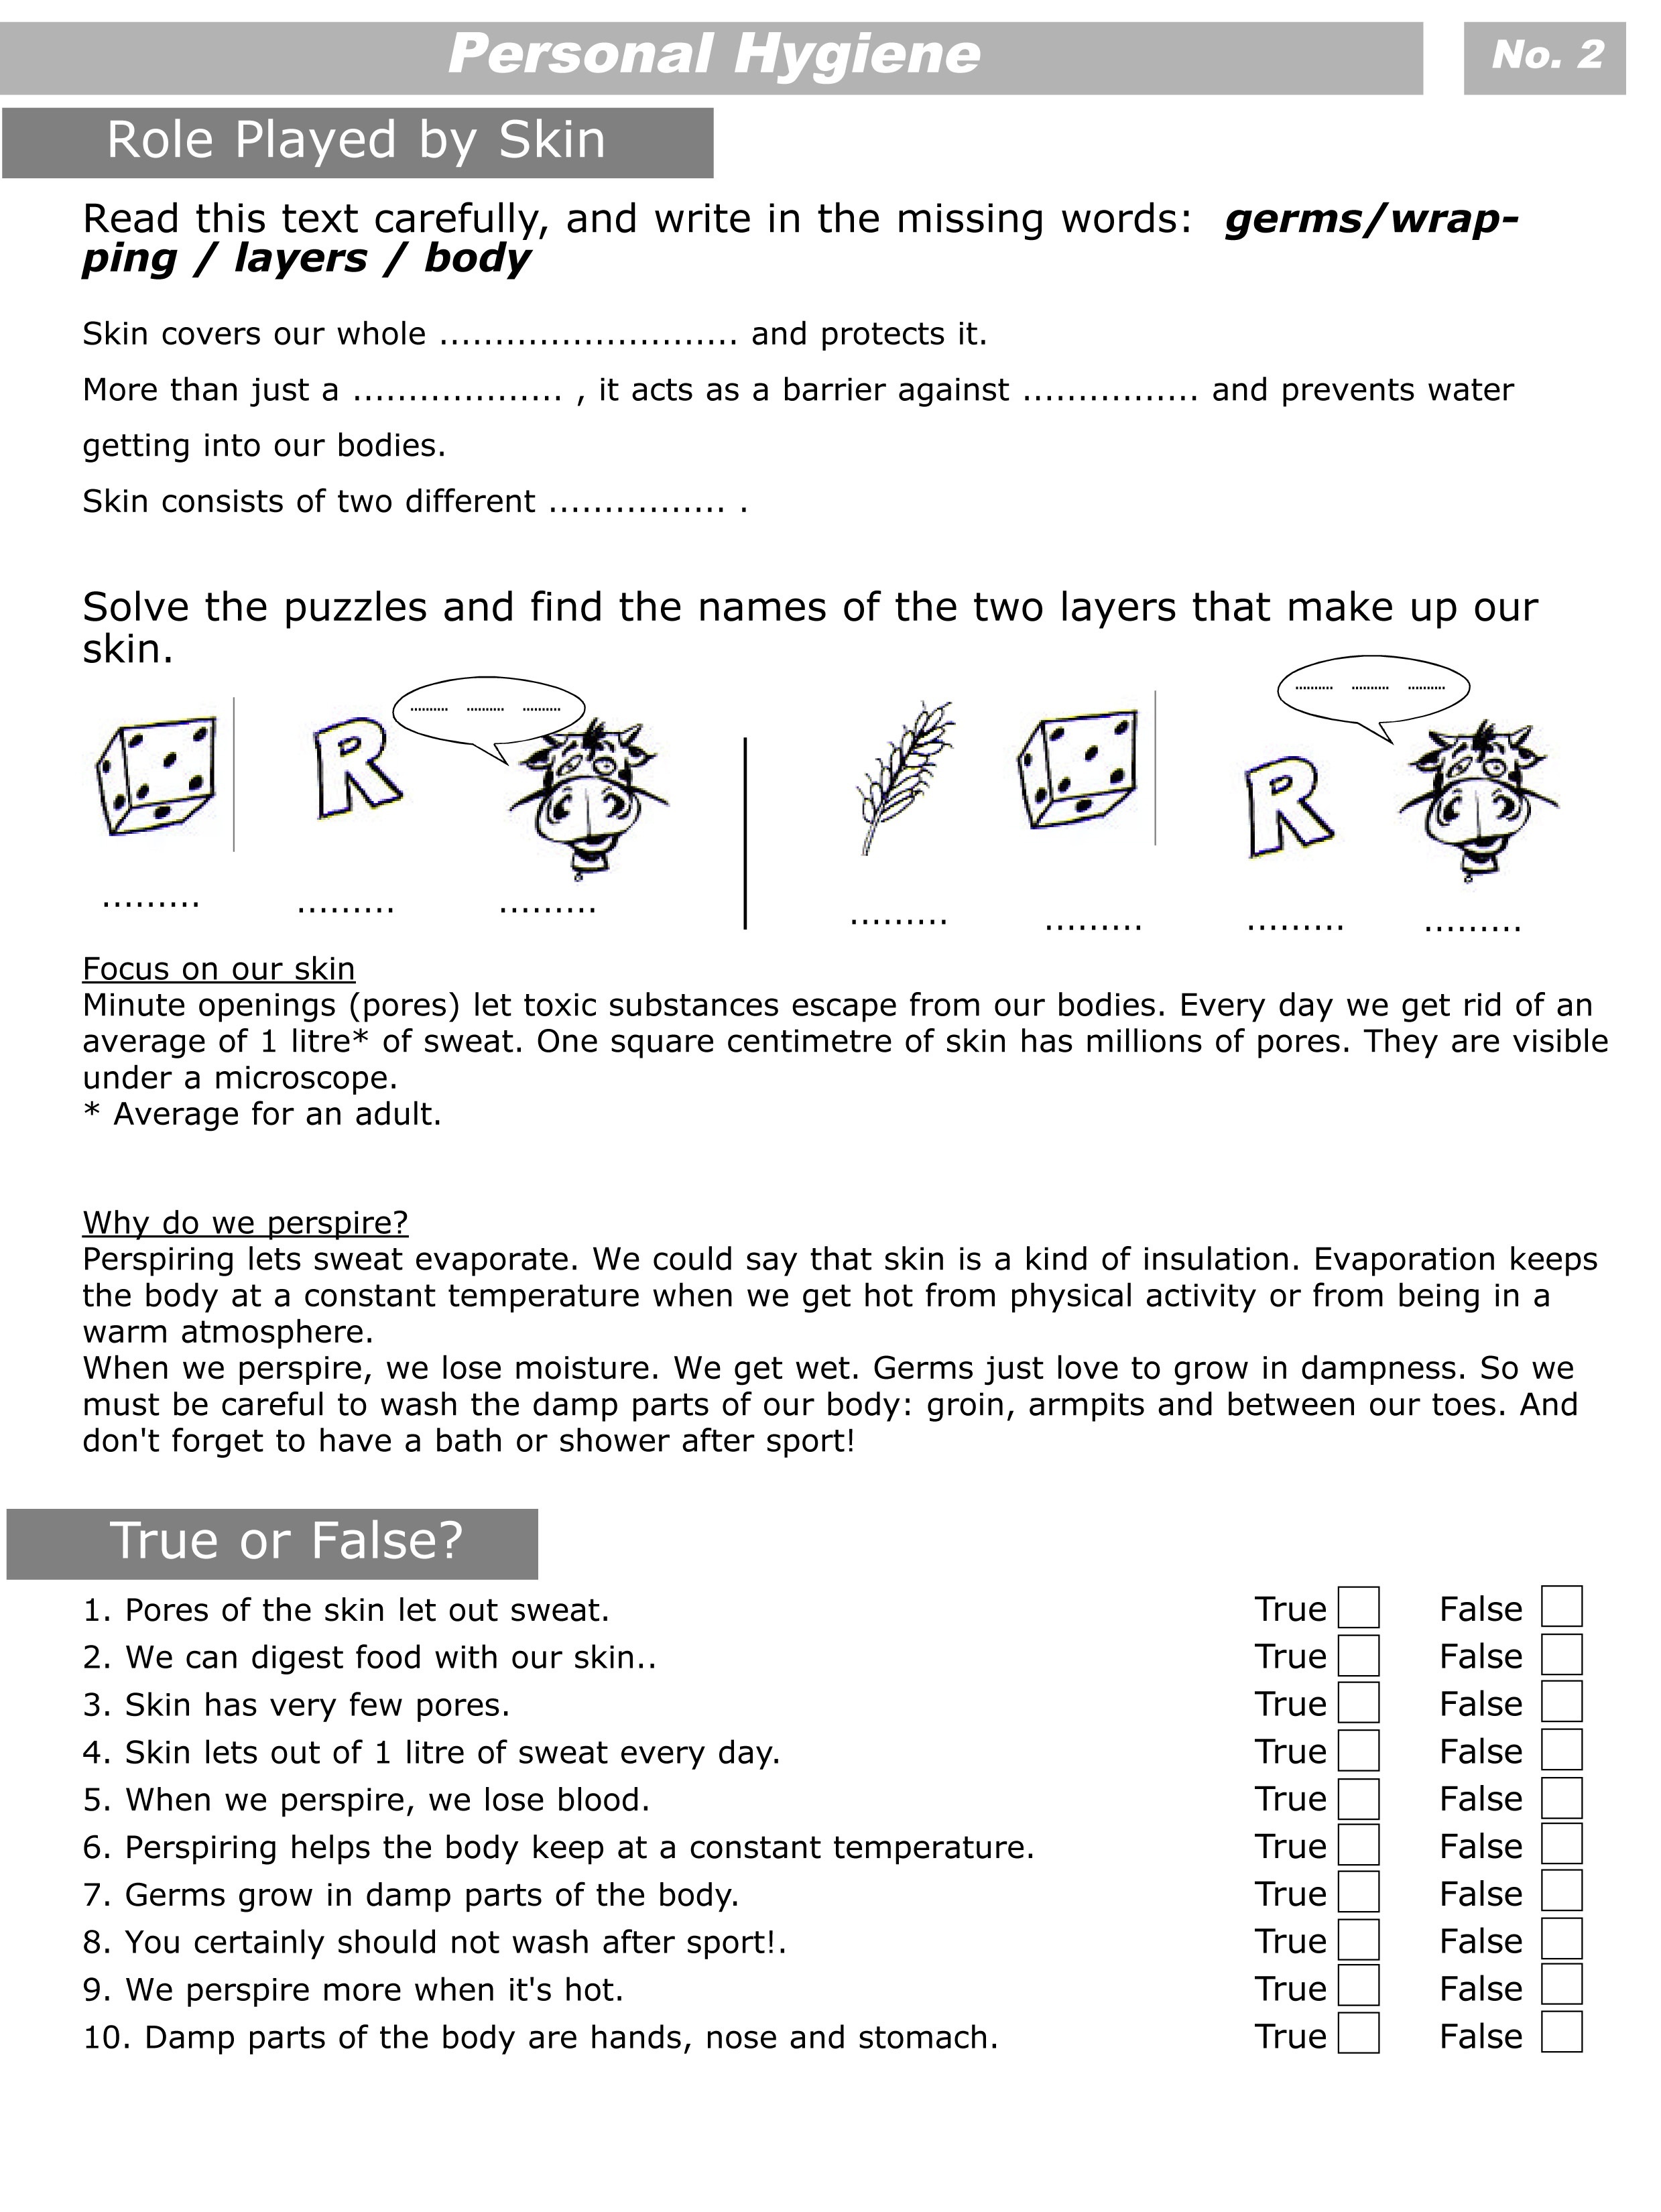 free-printable-personal-hygiene-worksheets-free-printable-a-to-z